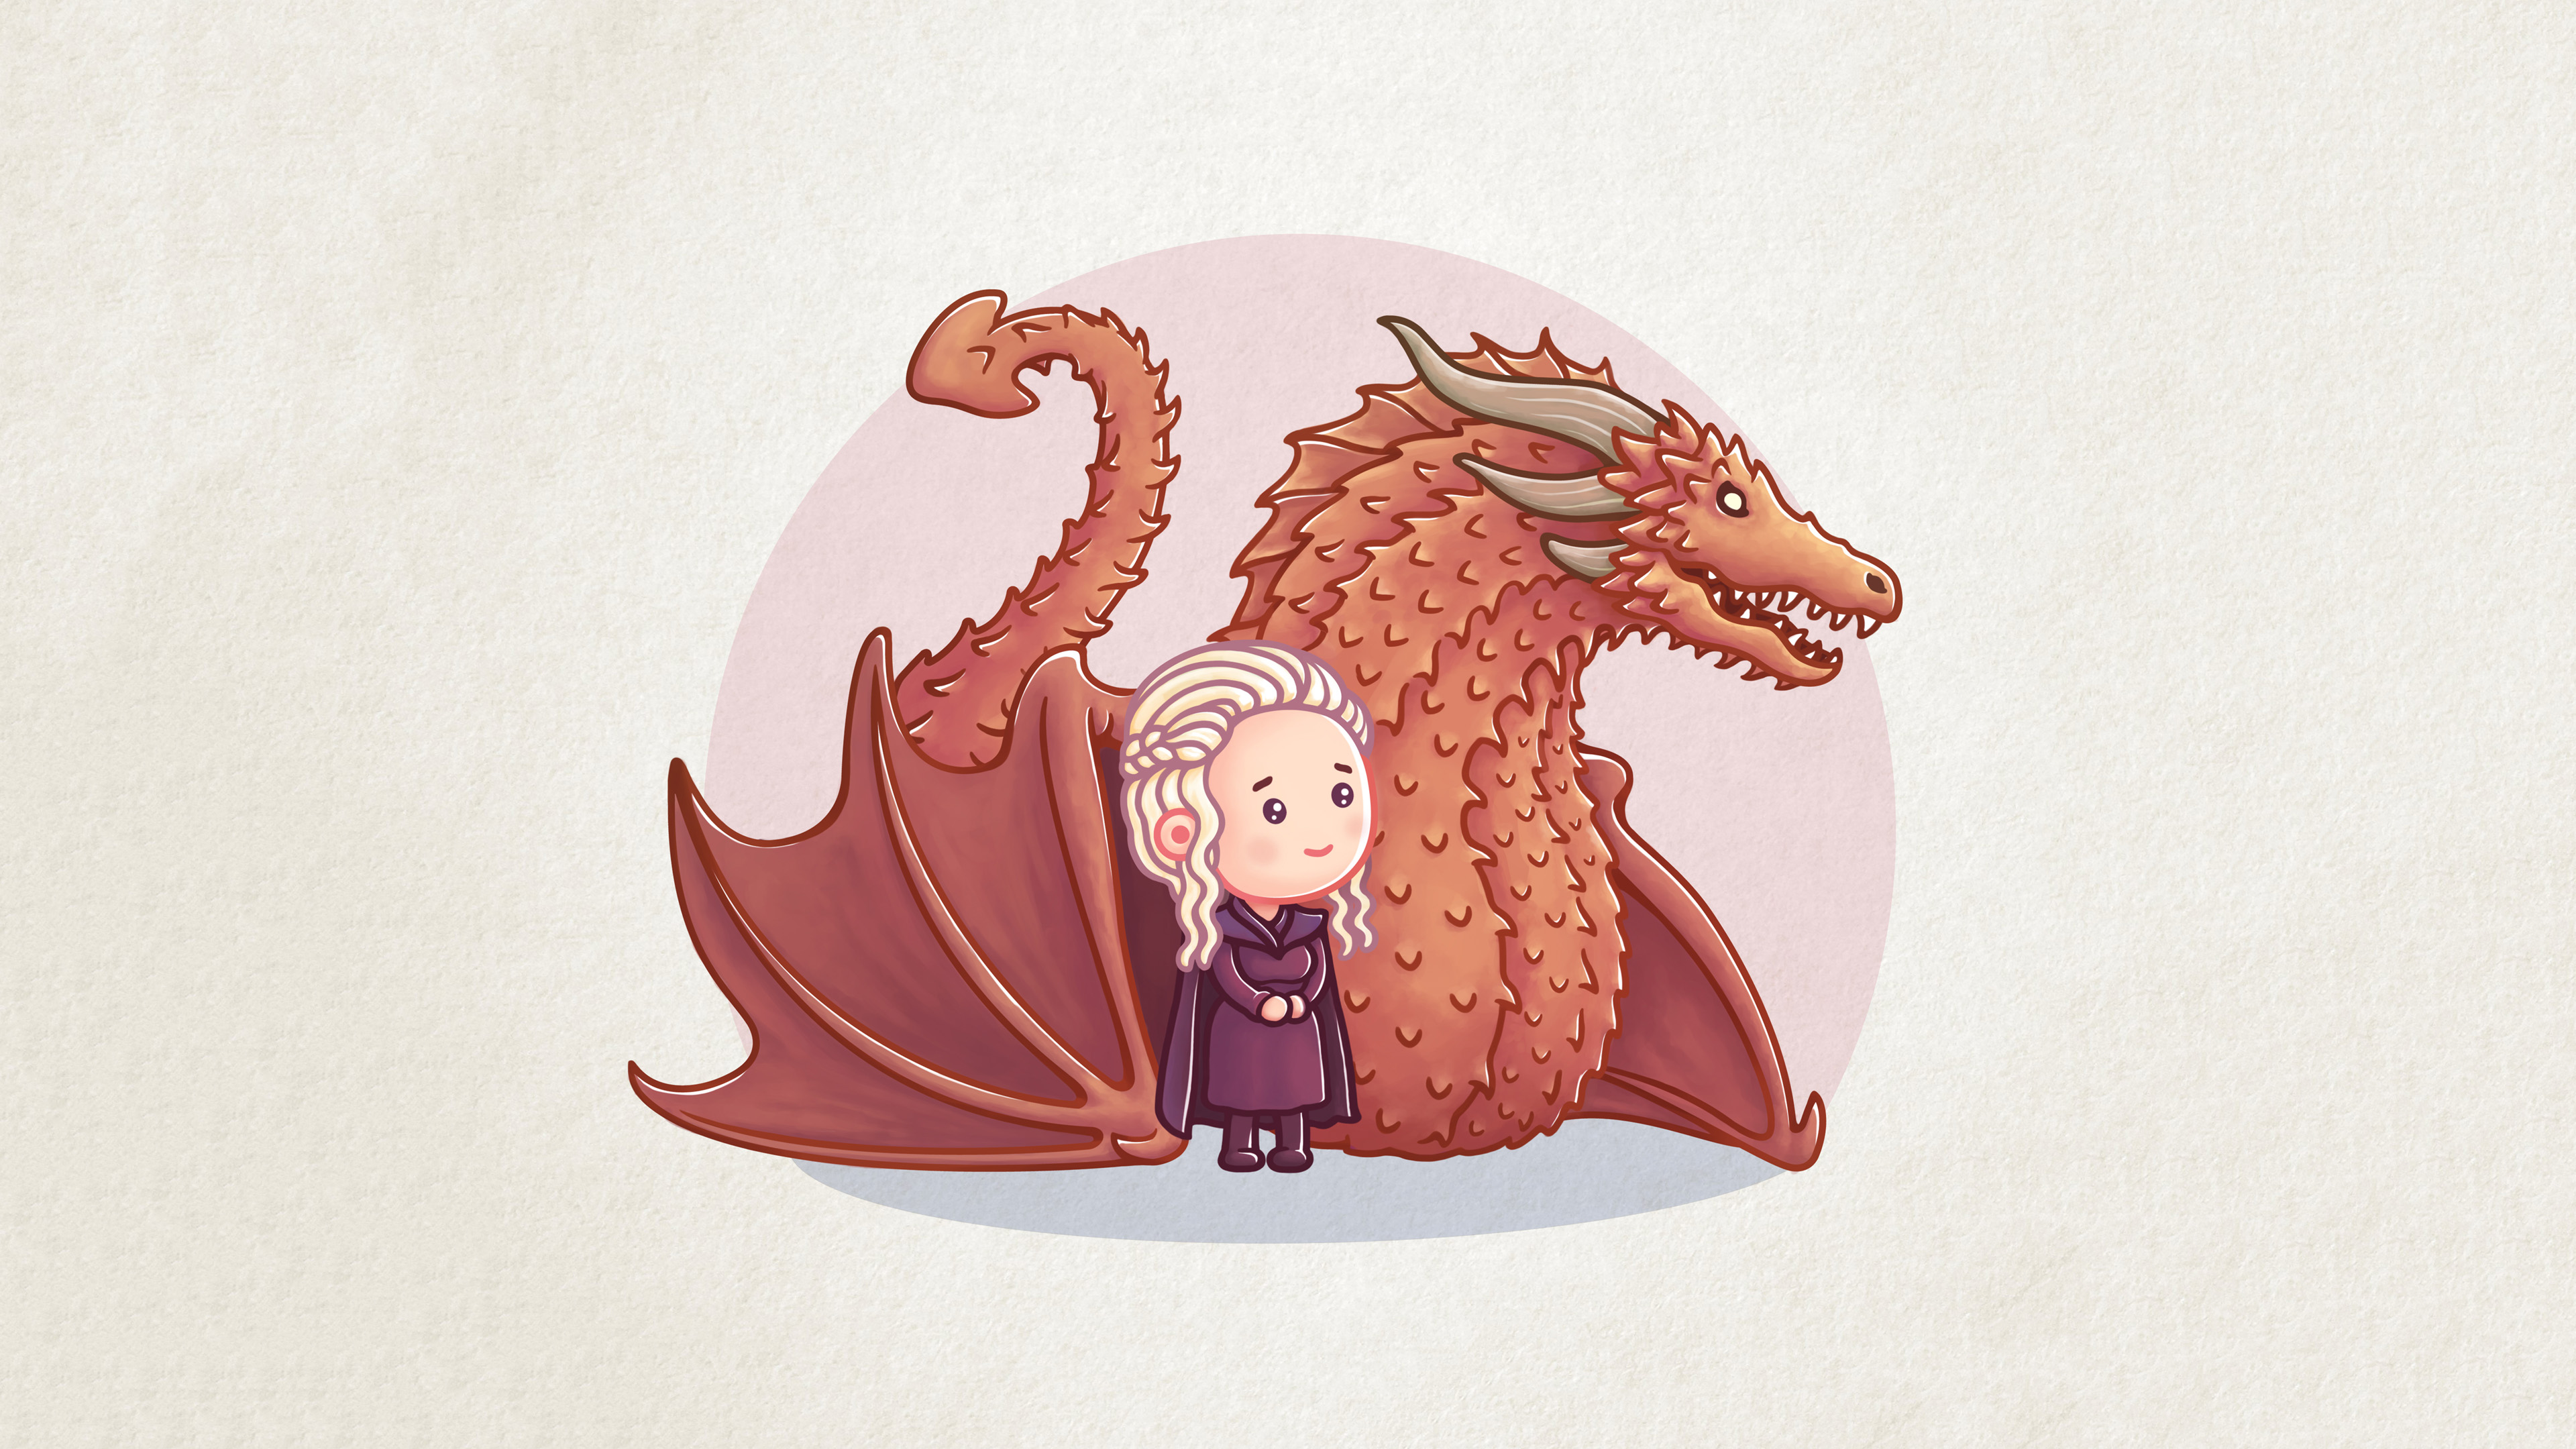 General 3840x2160 A Song of Ice and Fire Game of Thrones dragon illustration cartoon